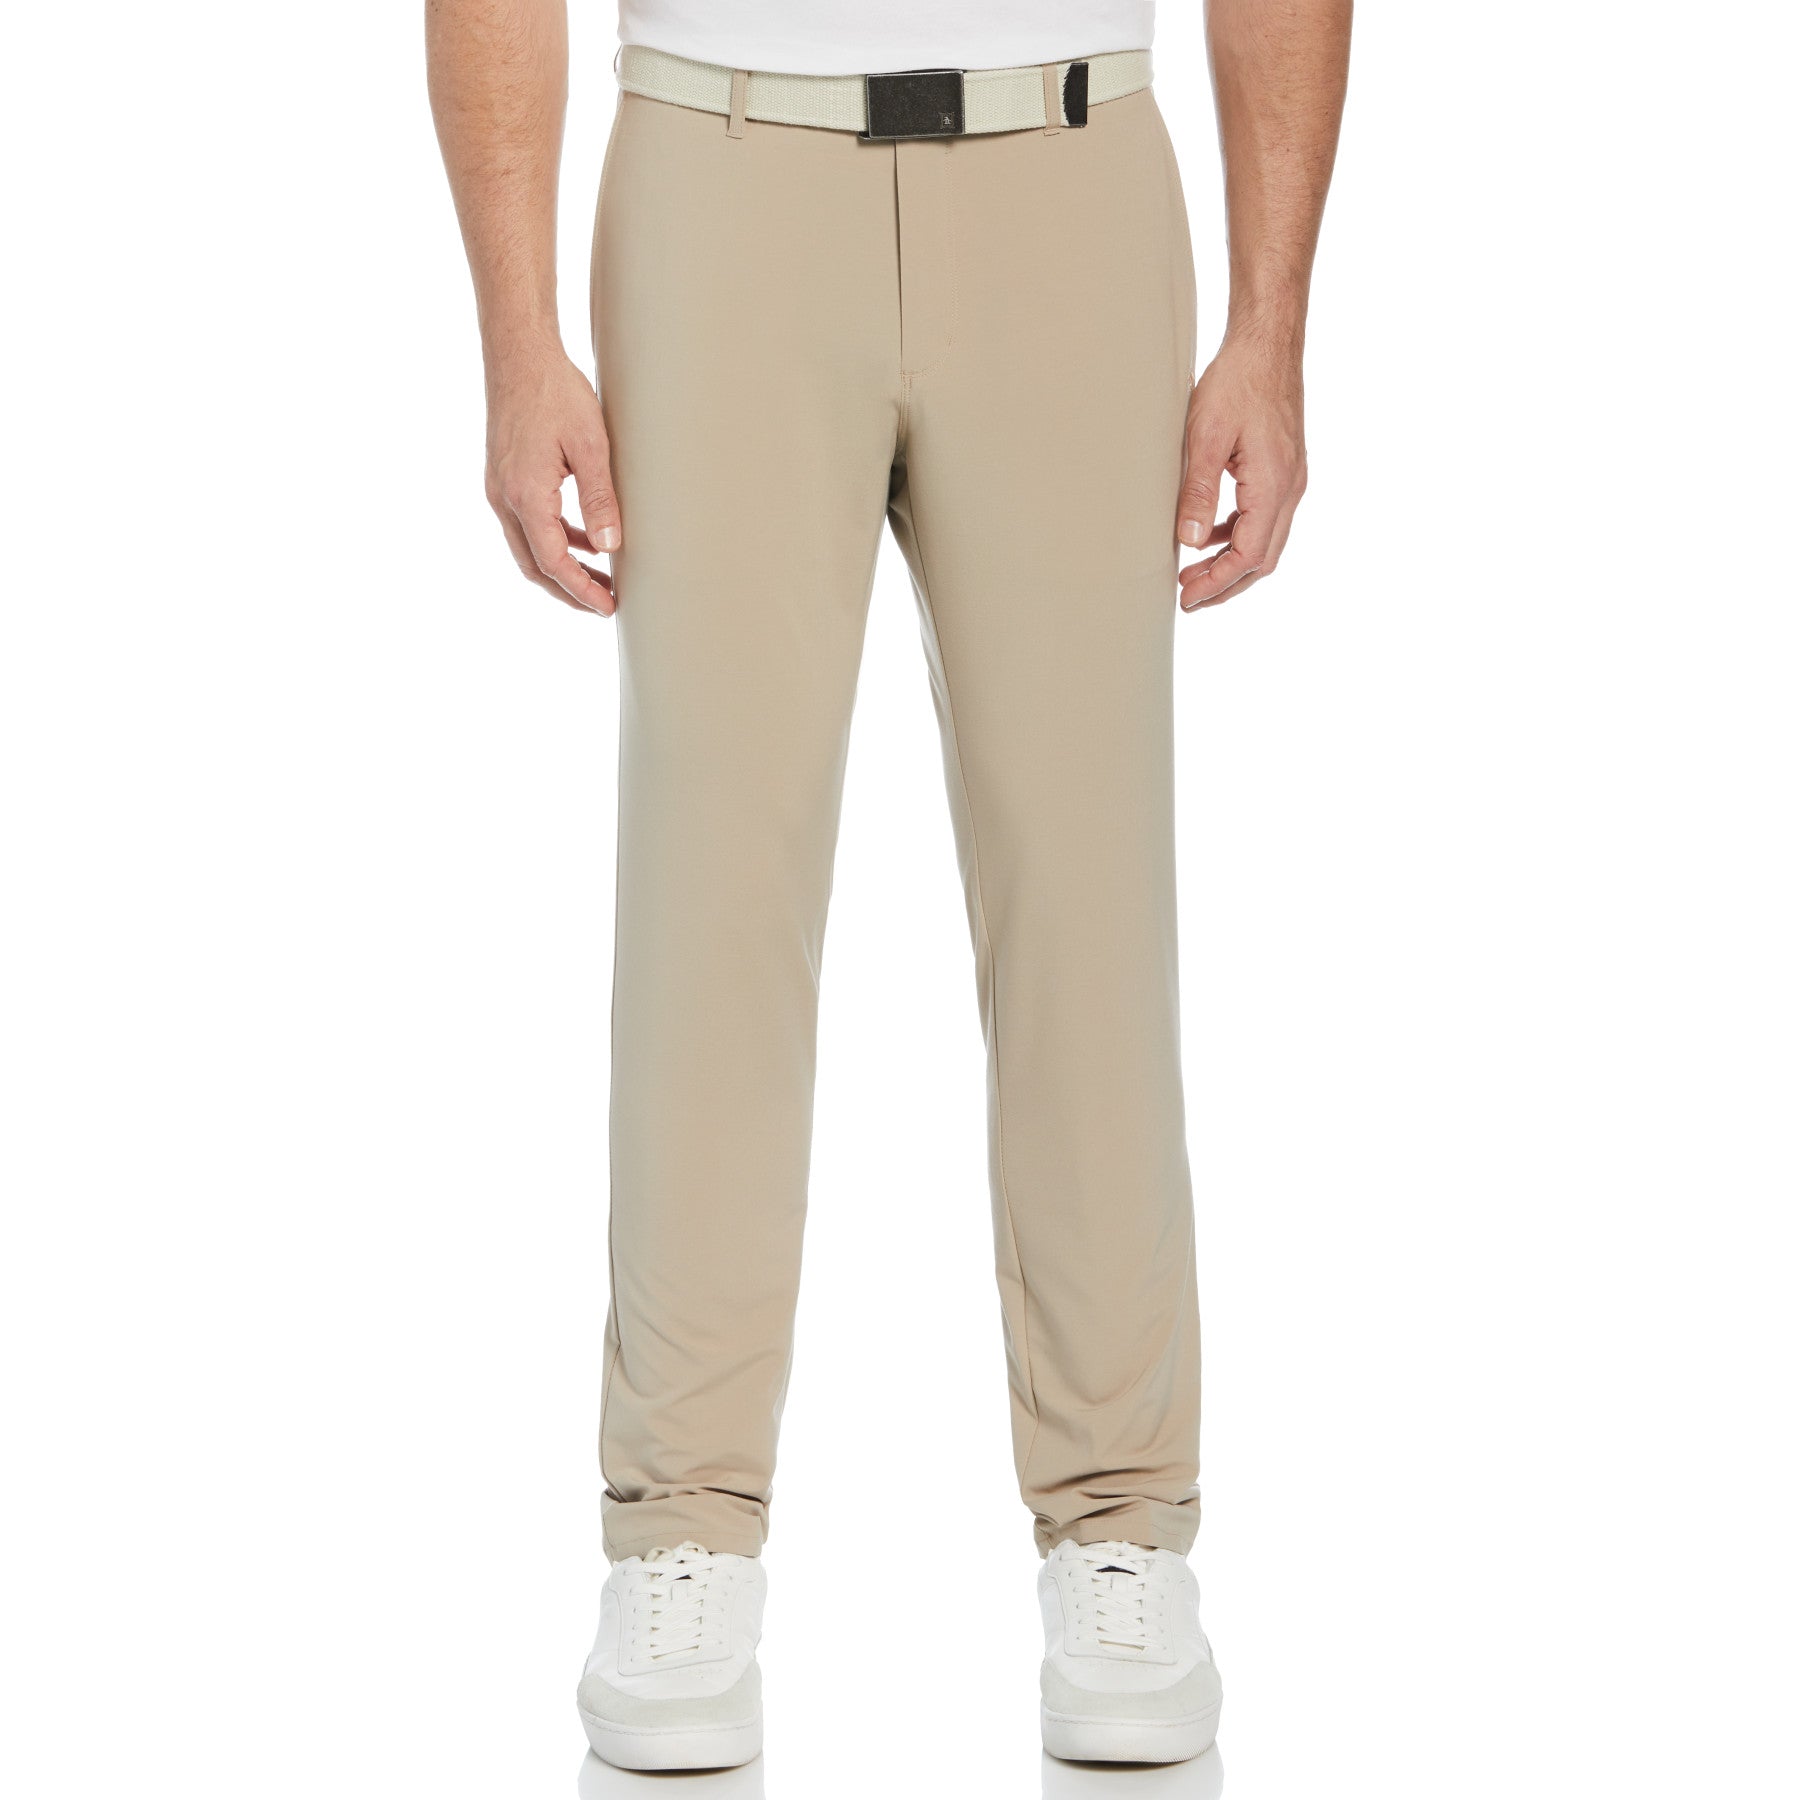 View Performance Golf Trouser In Chinchilla information